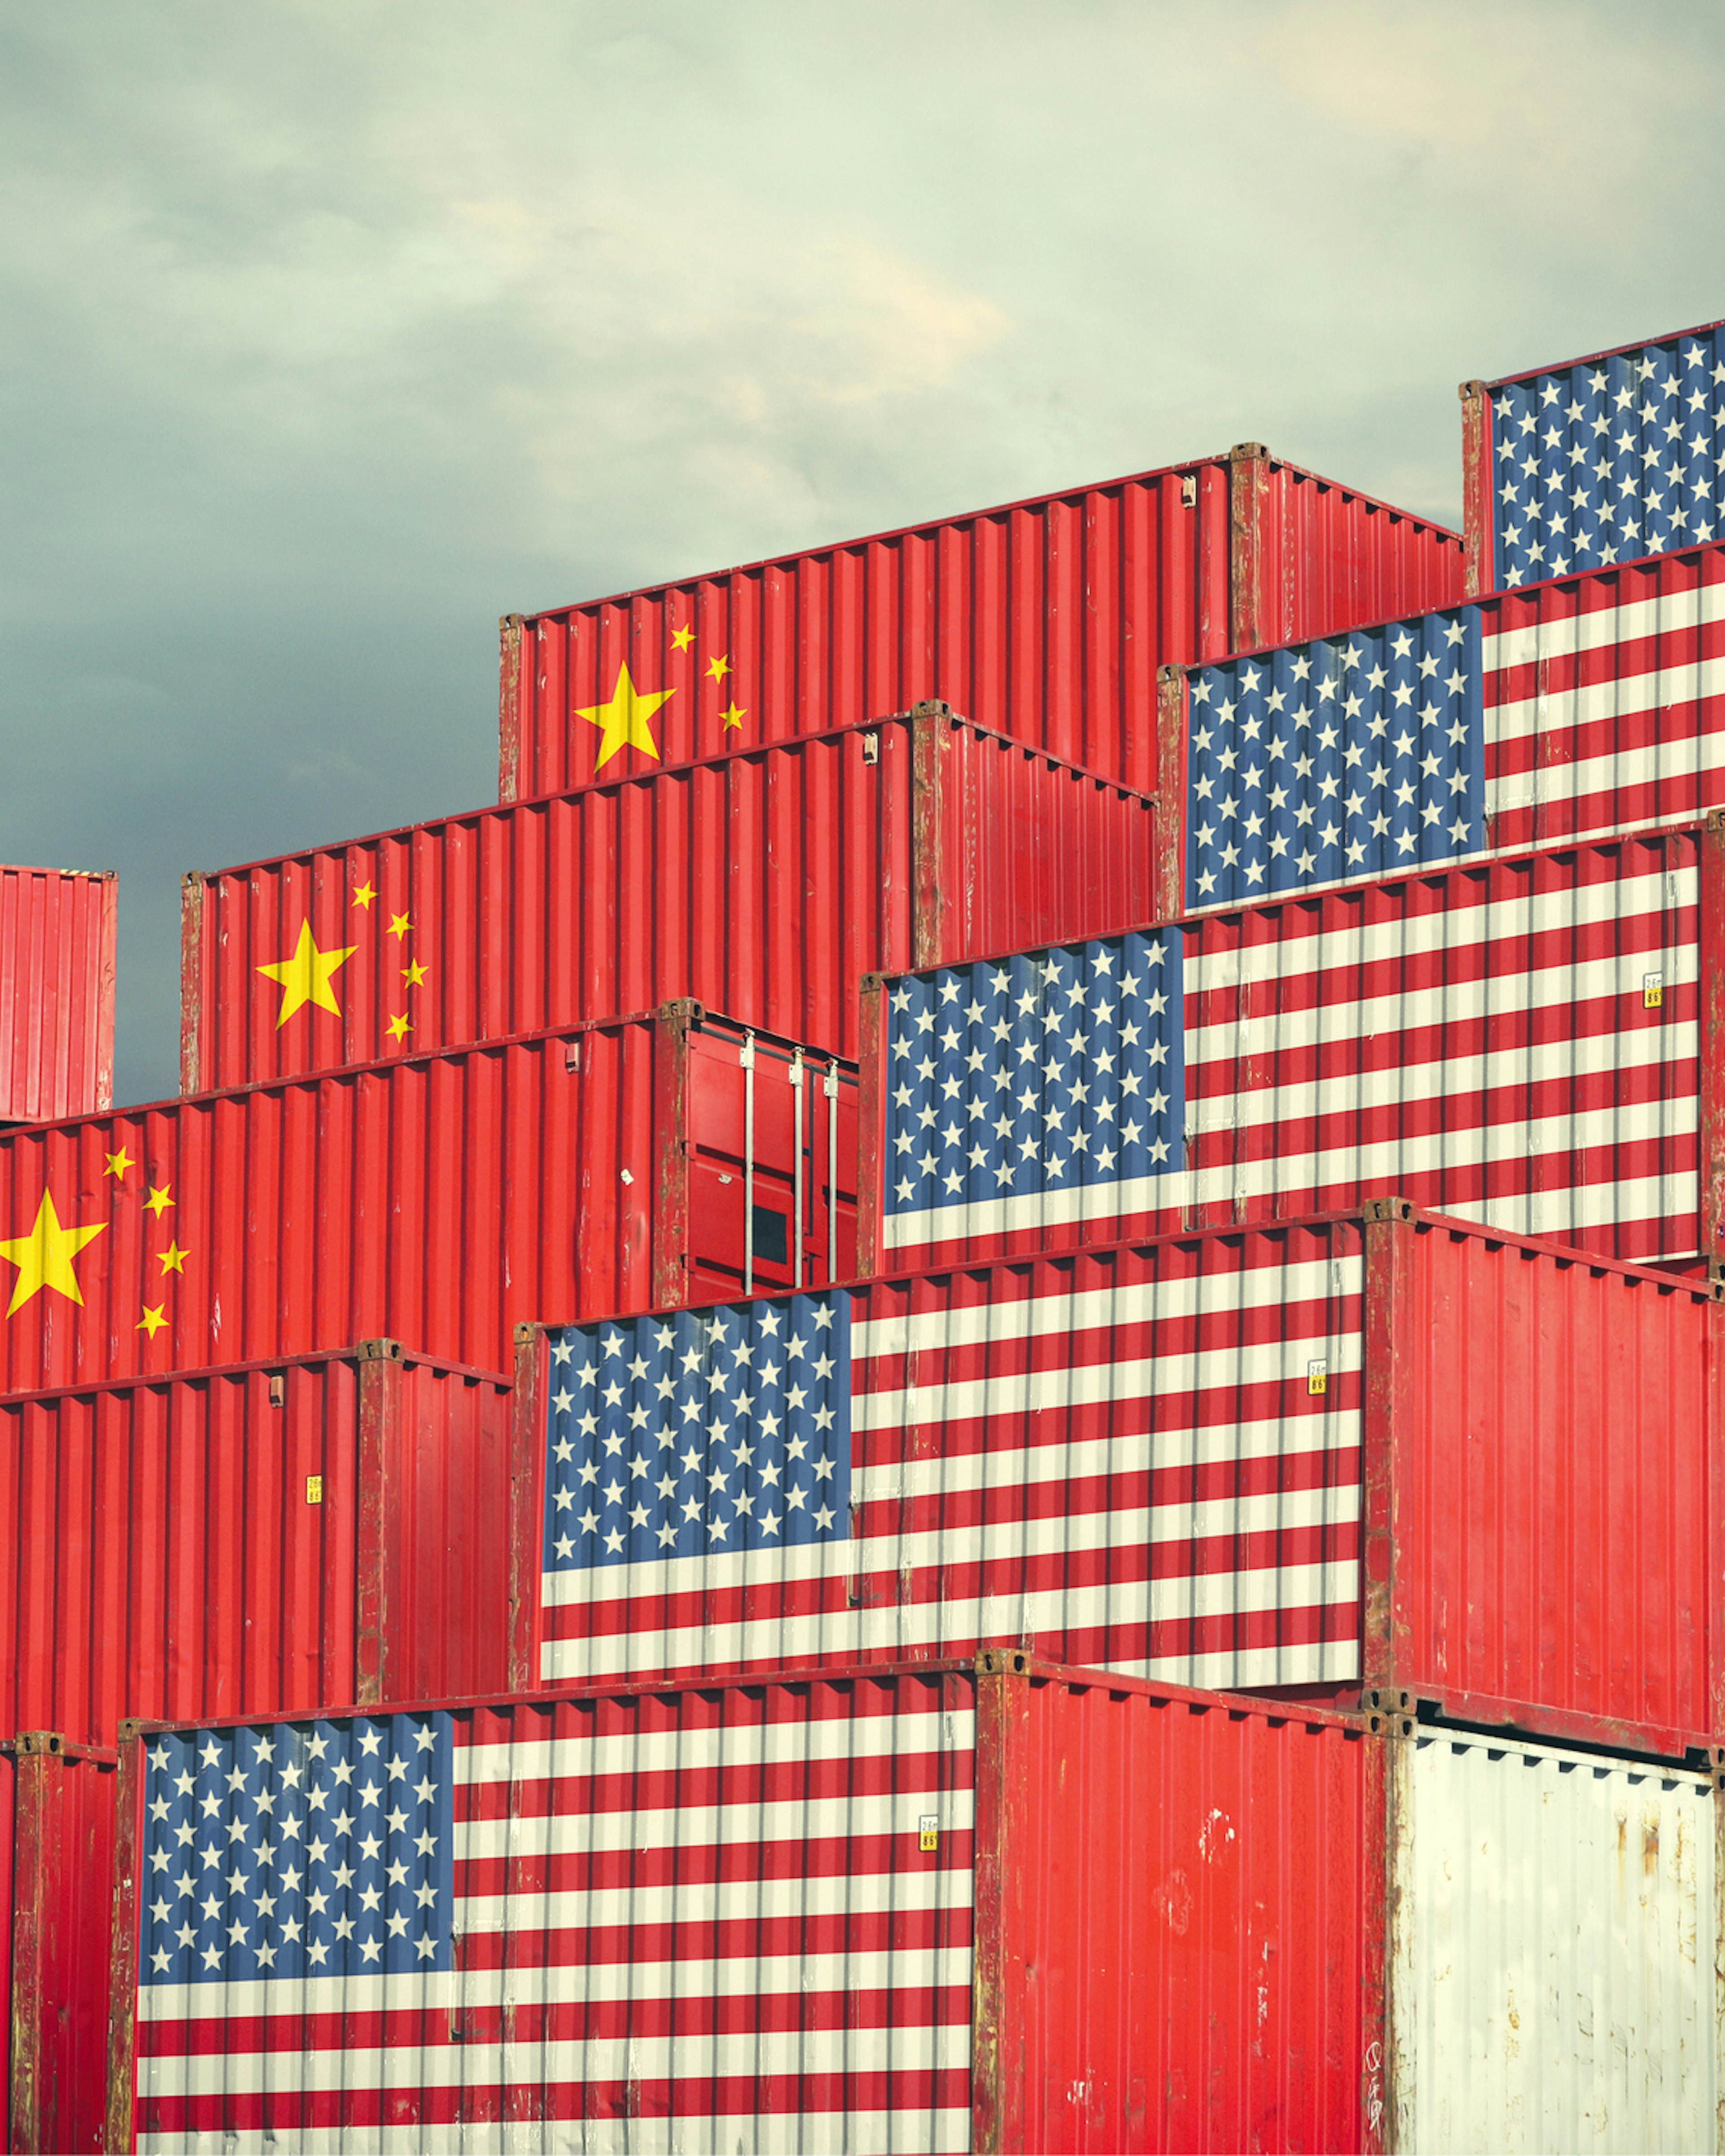 Chinese and United Stases cargo containers reflecting trade war and restrictions in export and import